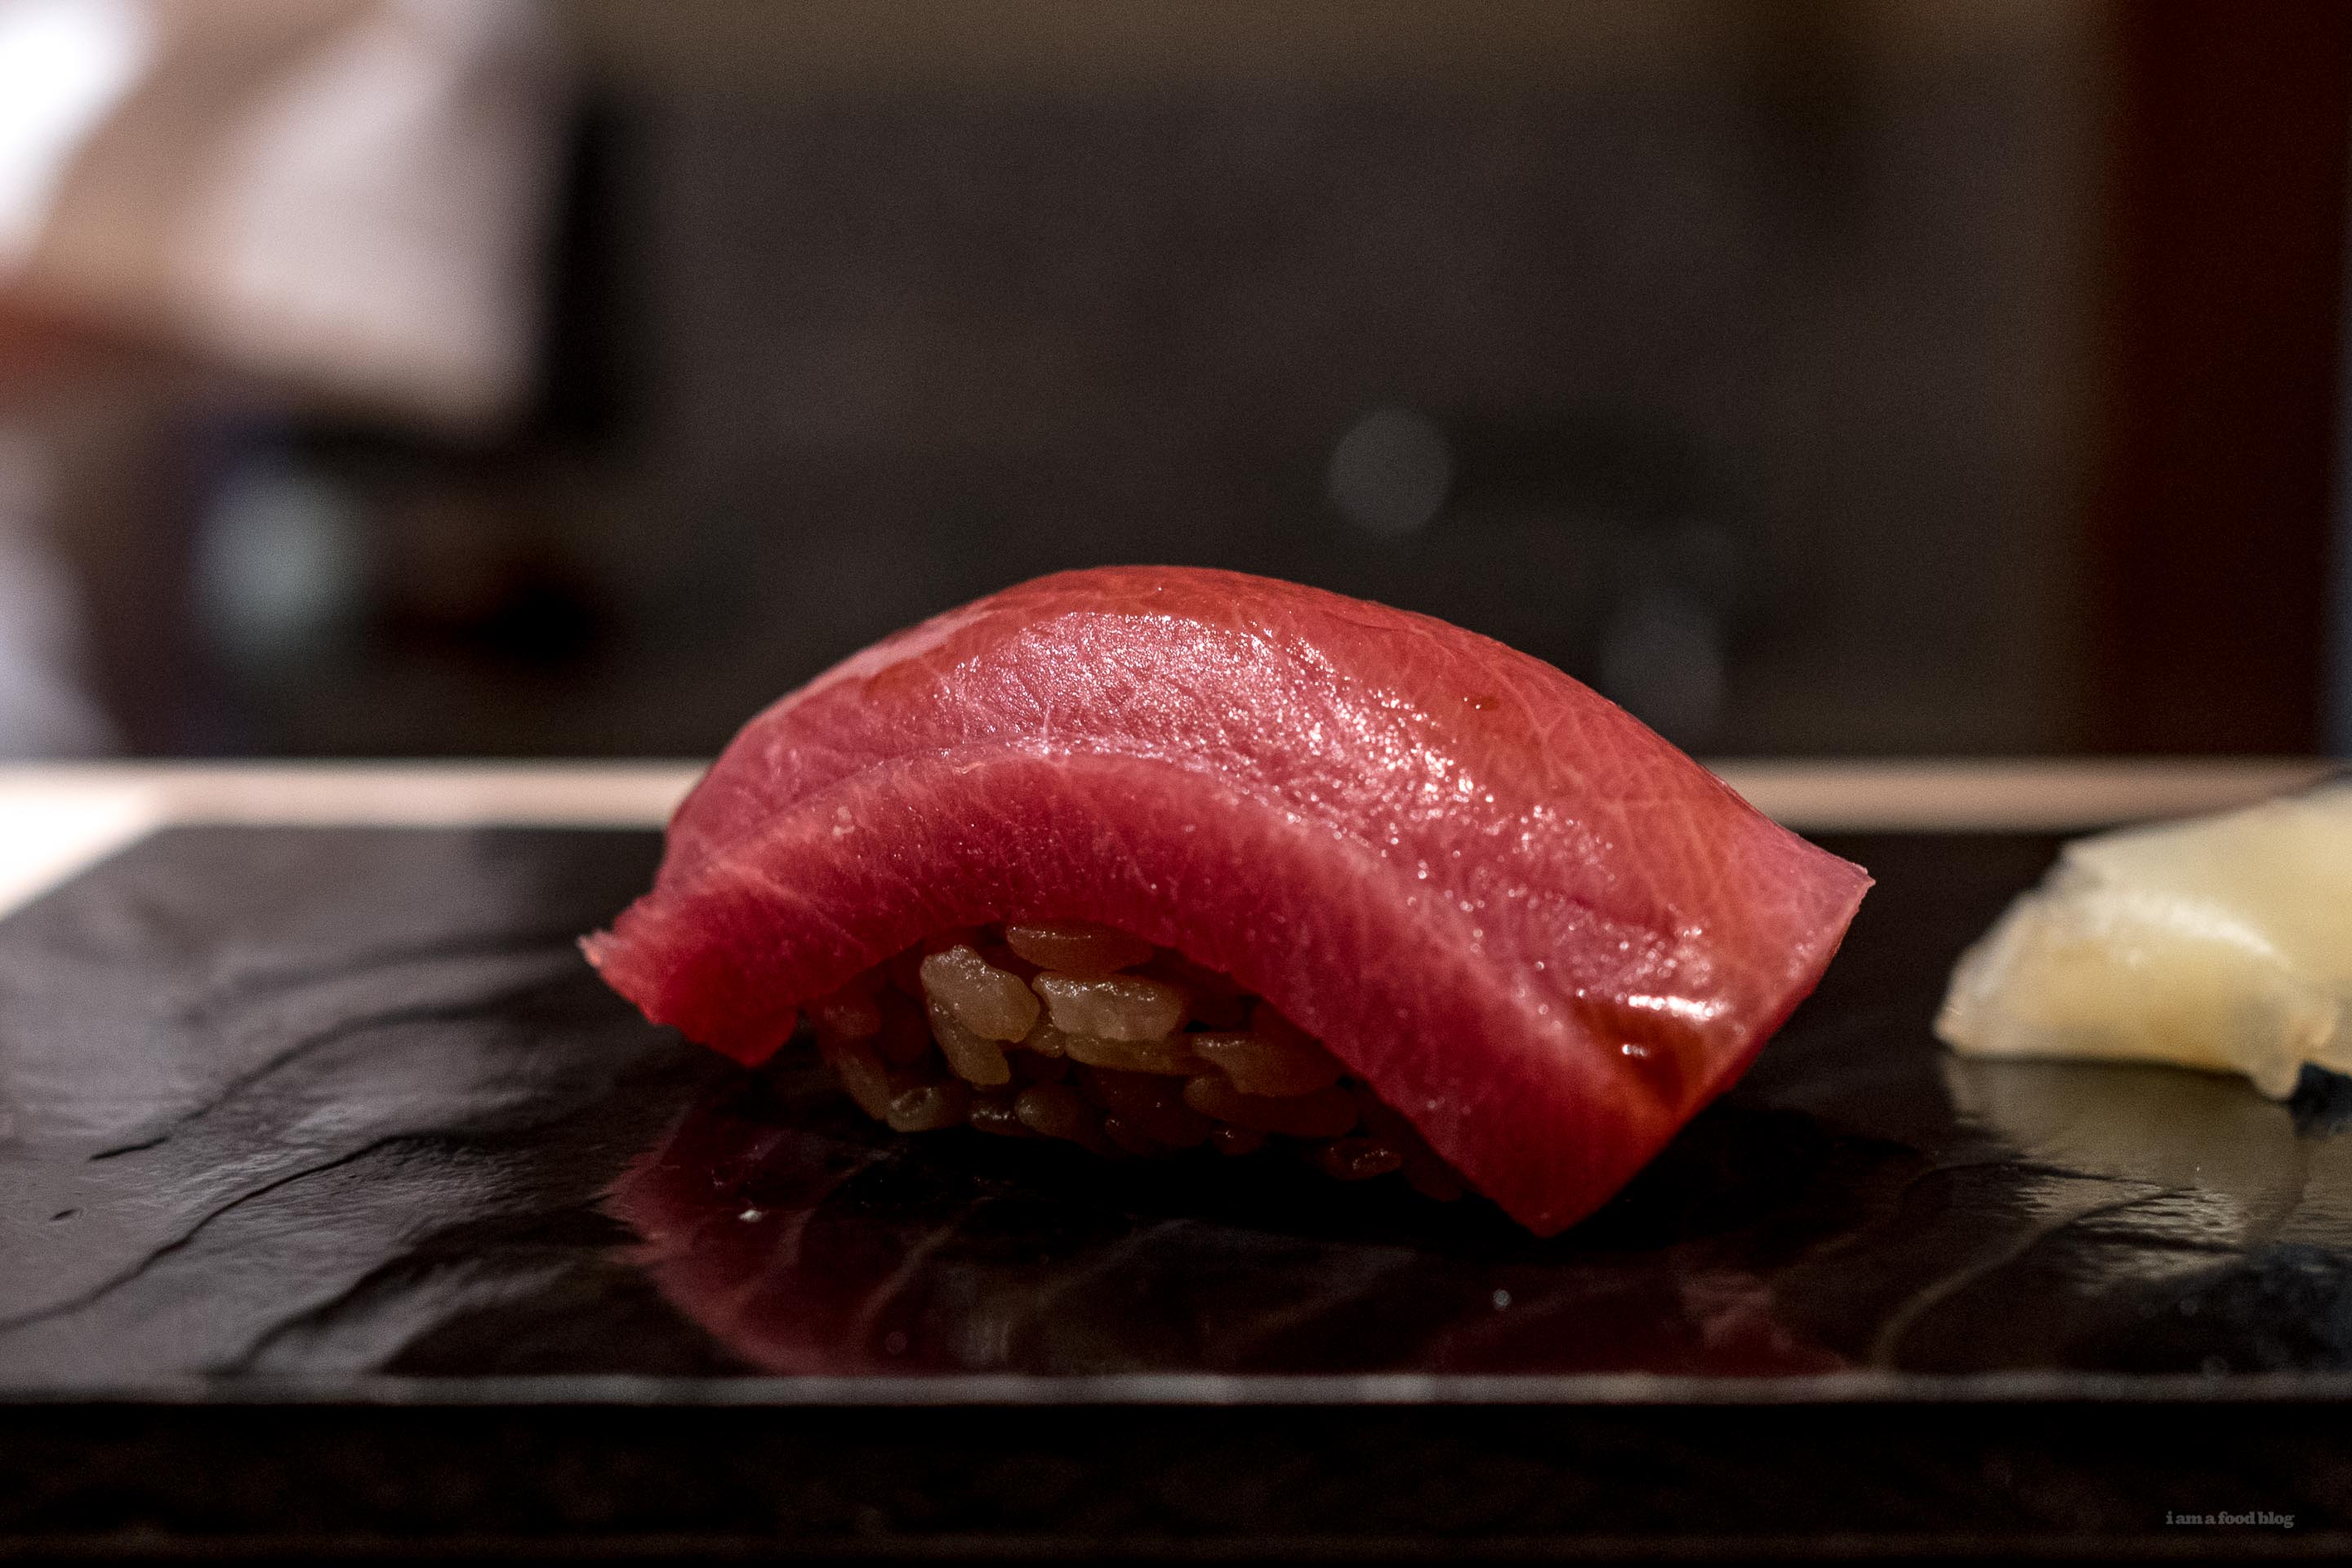 Tokyo Food Guide: Sushi Tokami and what it’s like to eat high end Tokyo sushi